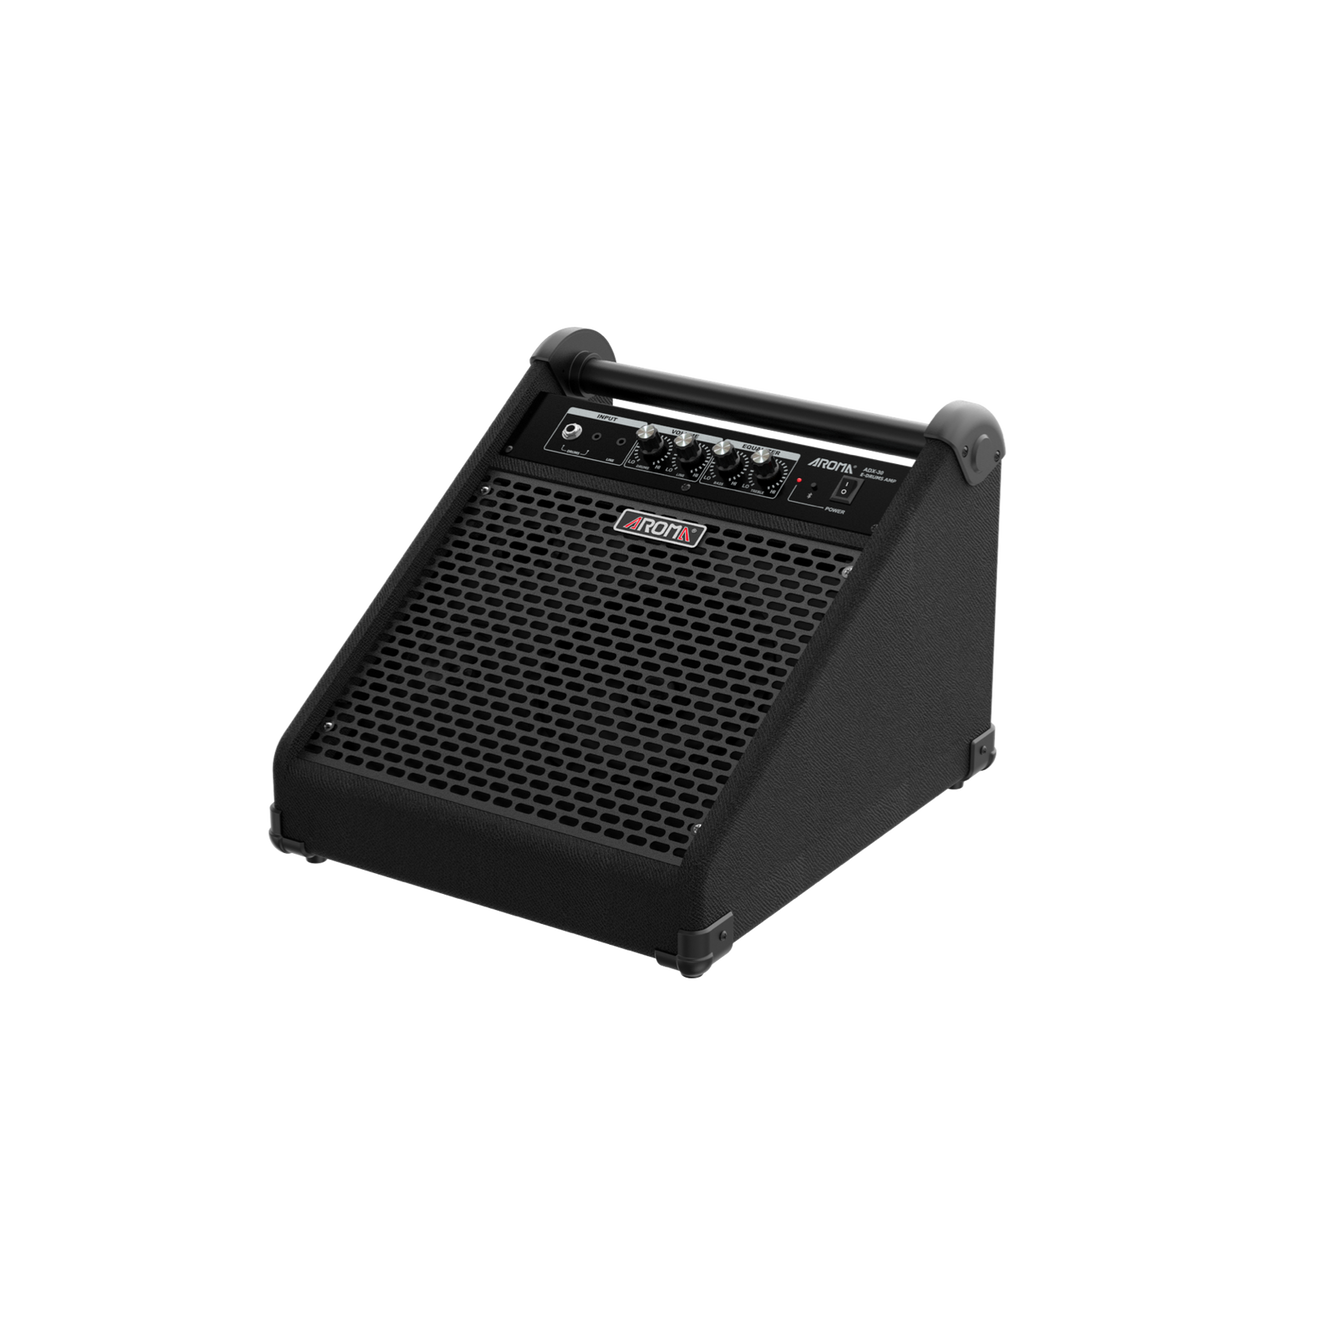 Amplifier Trống Điện Aroma ADX-30-Mai Nguyên Music